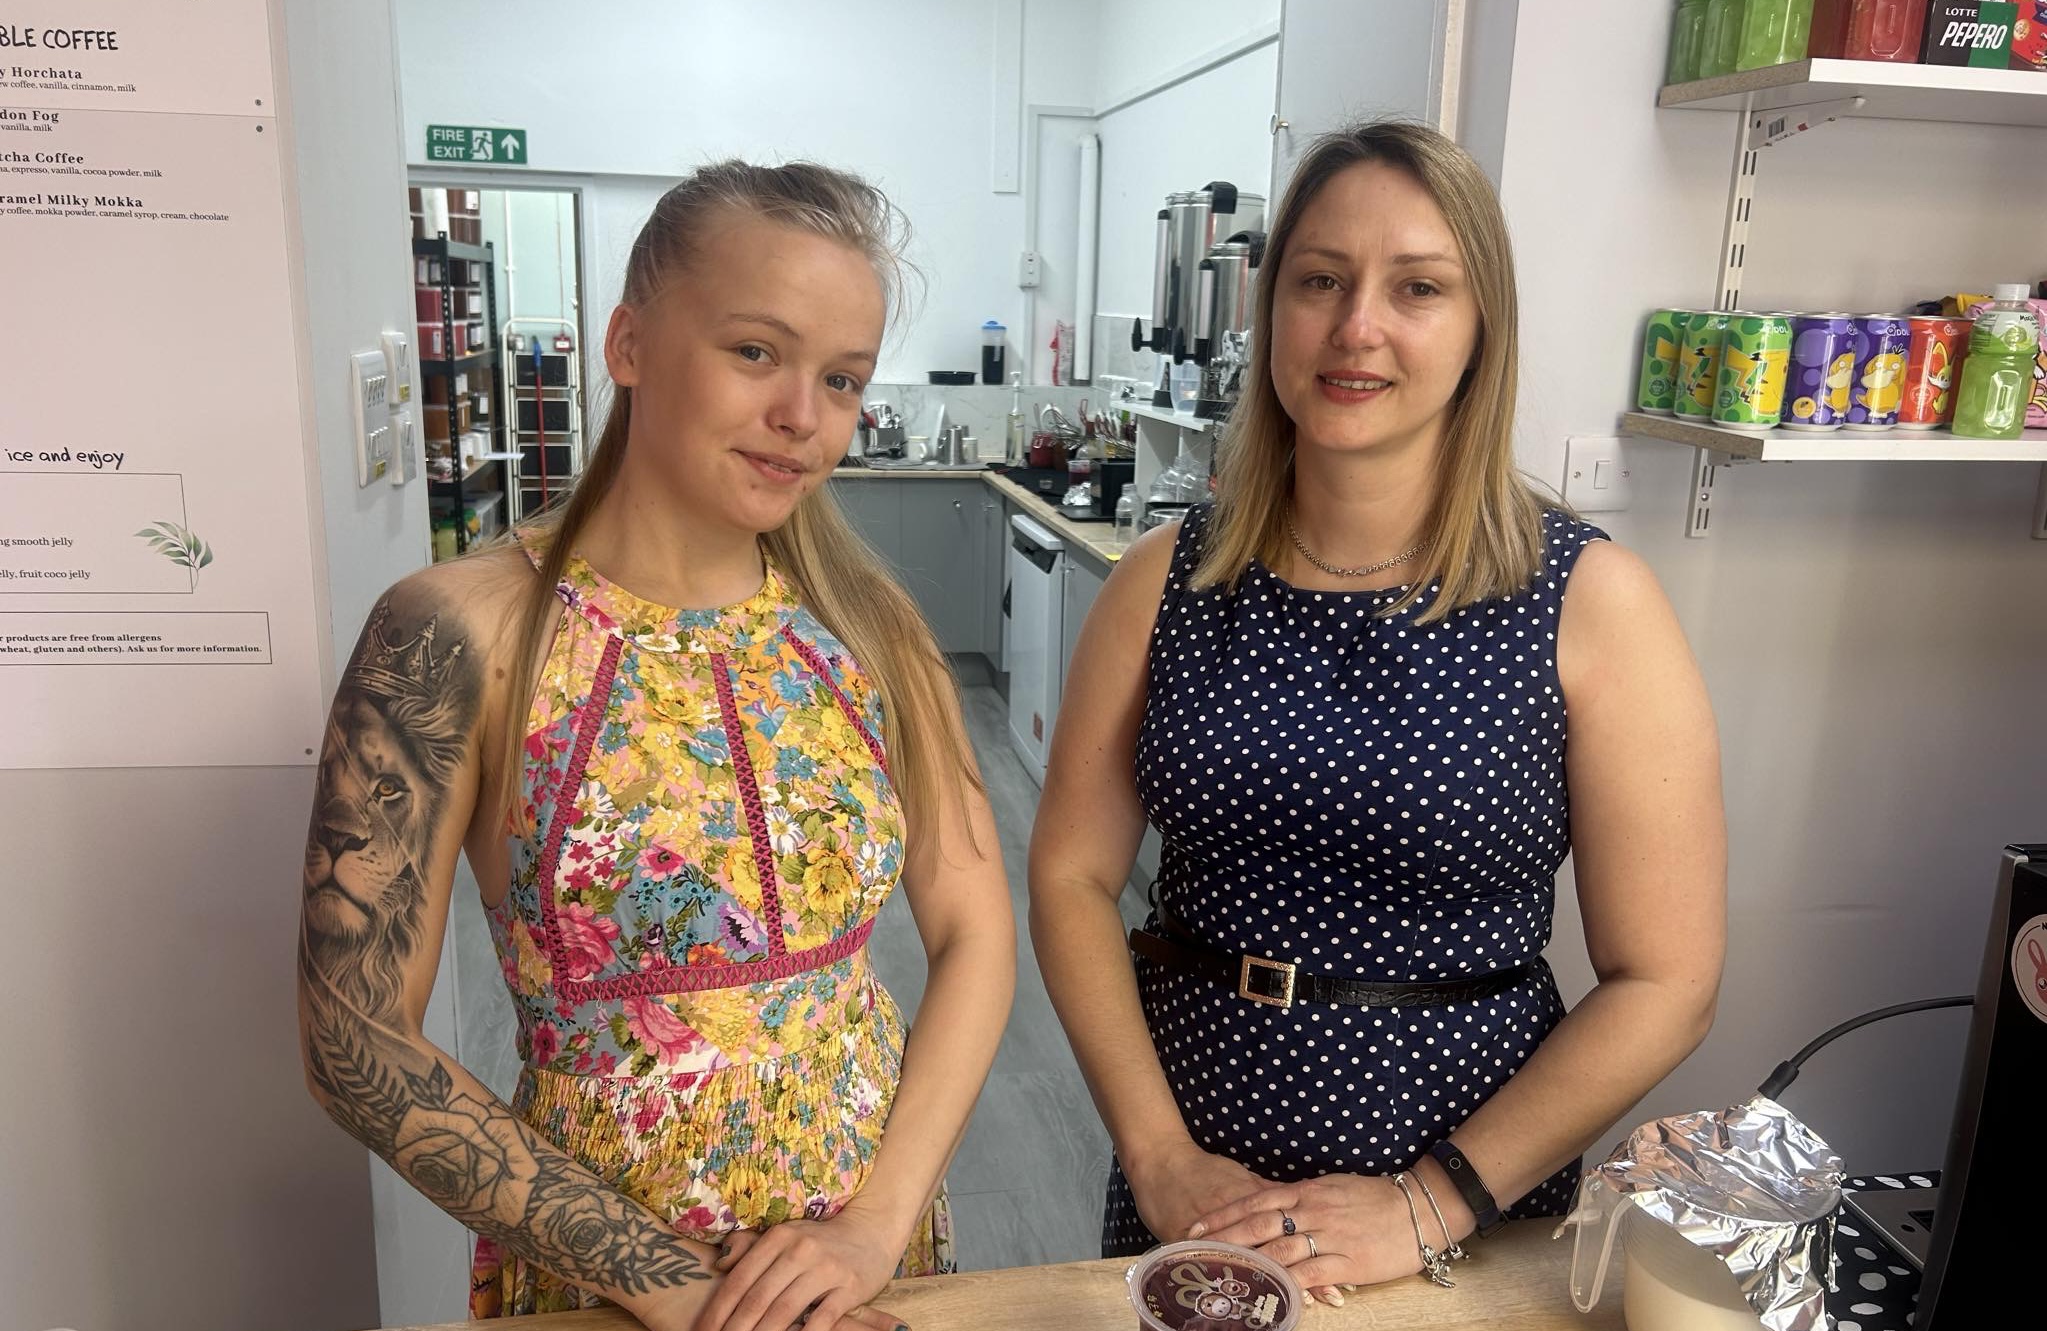 NEWS | A new shop has opened its doors in Hereford city centre today 